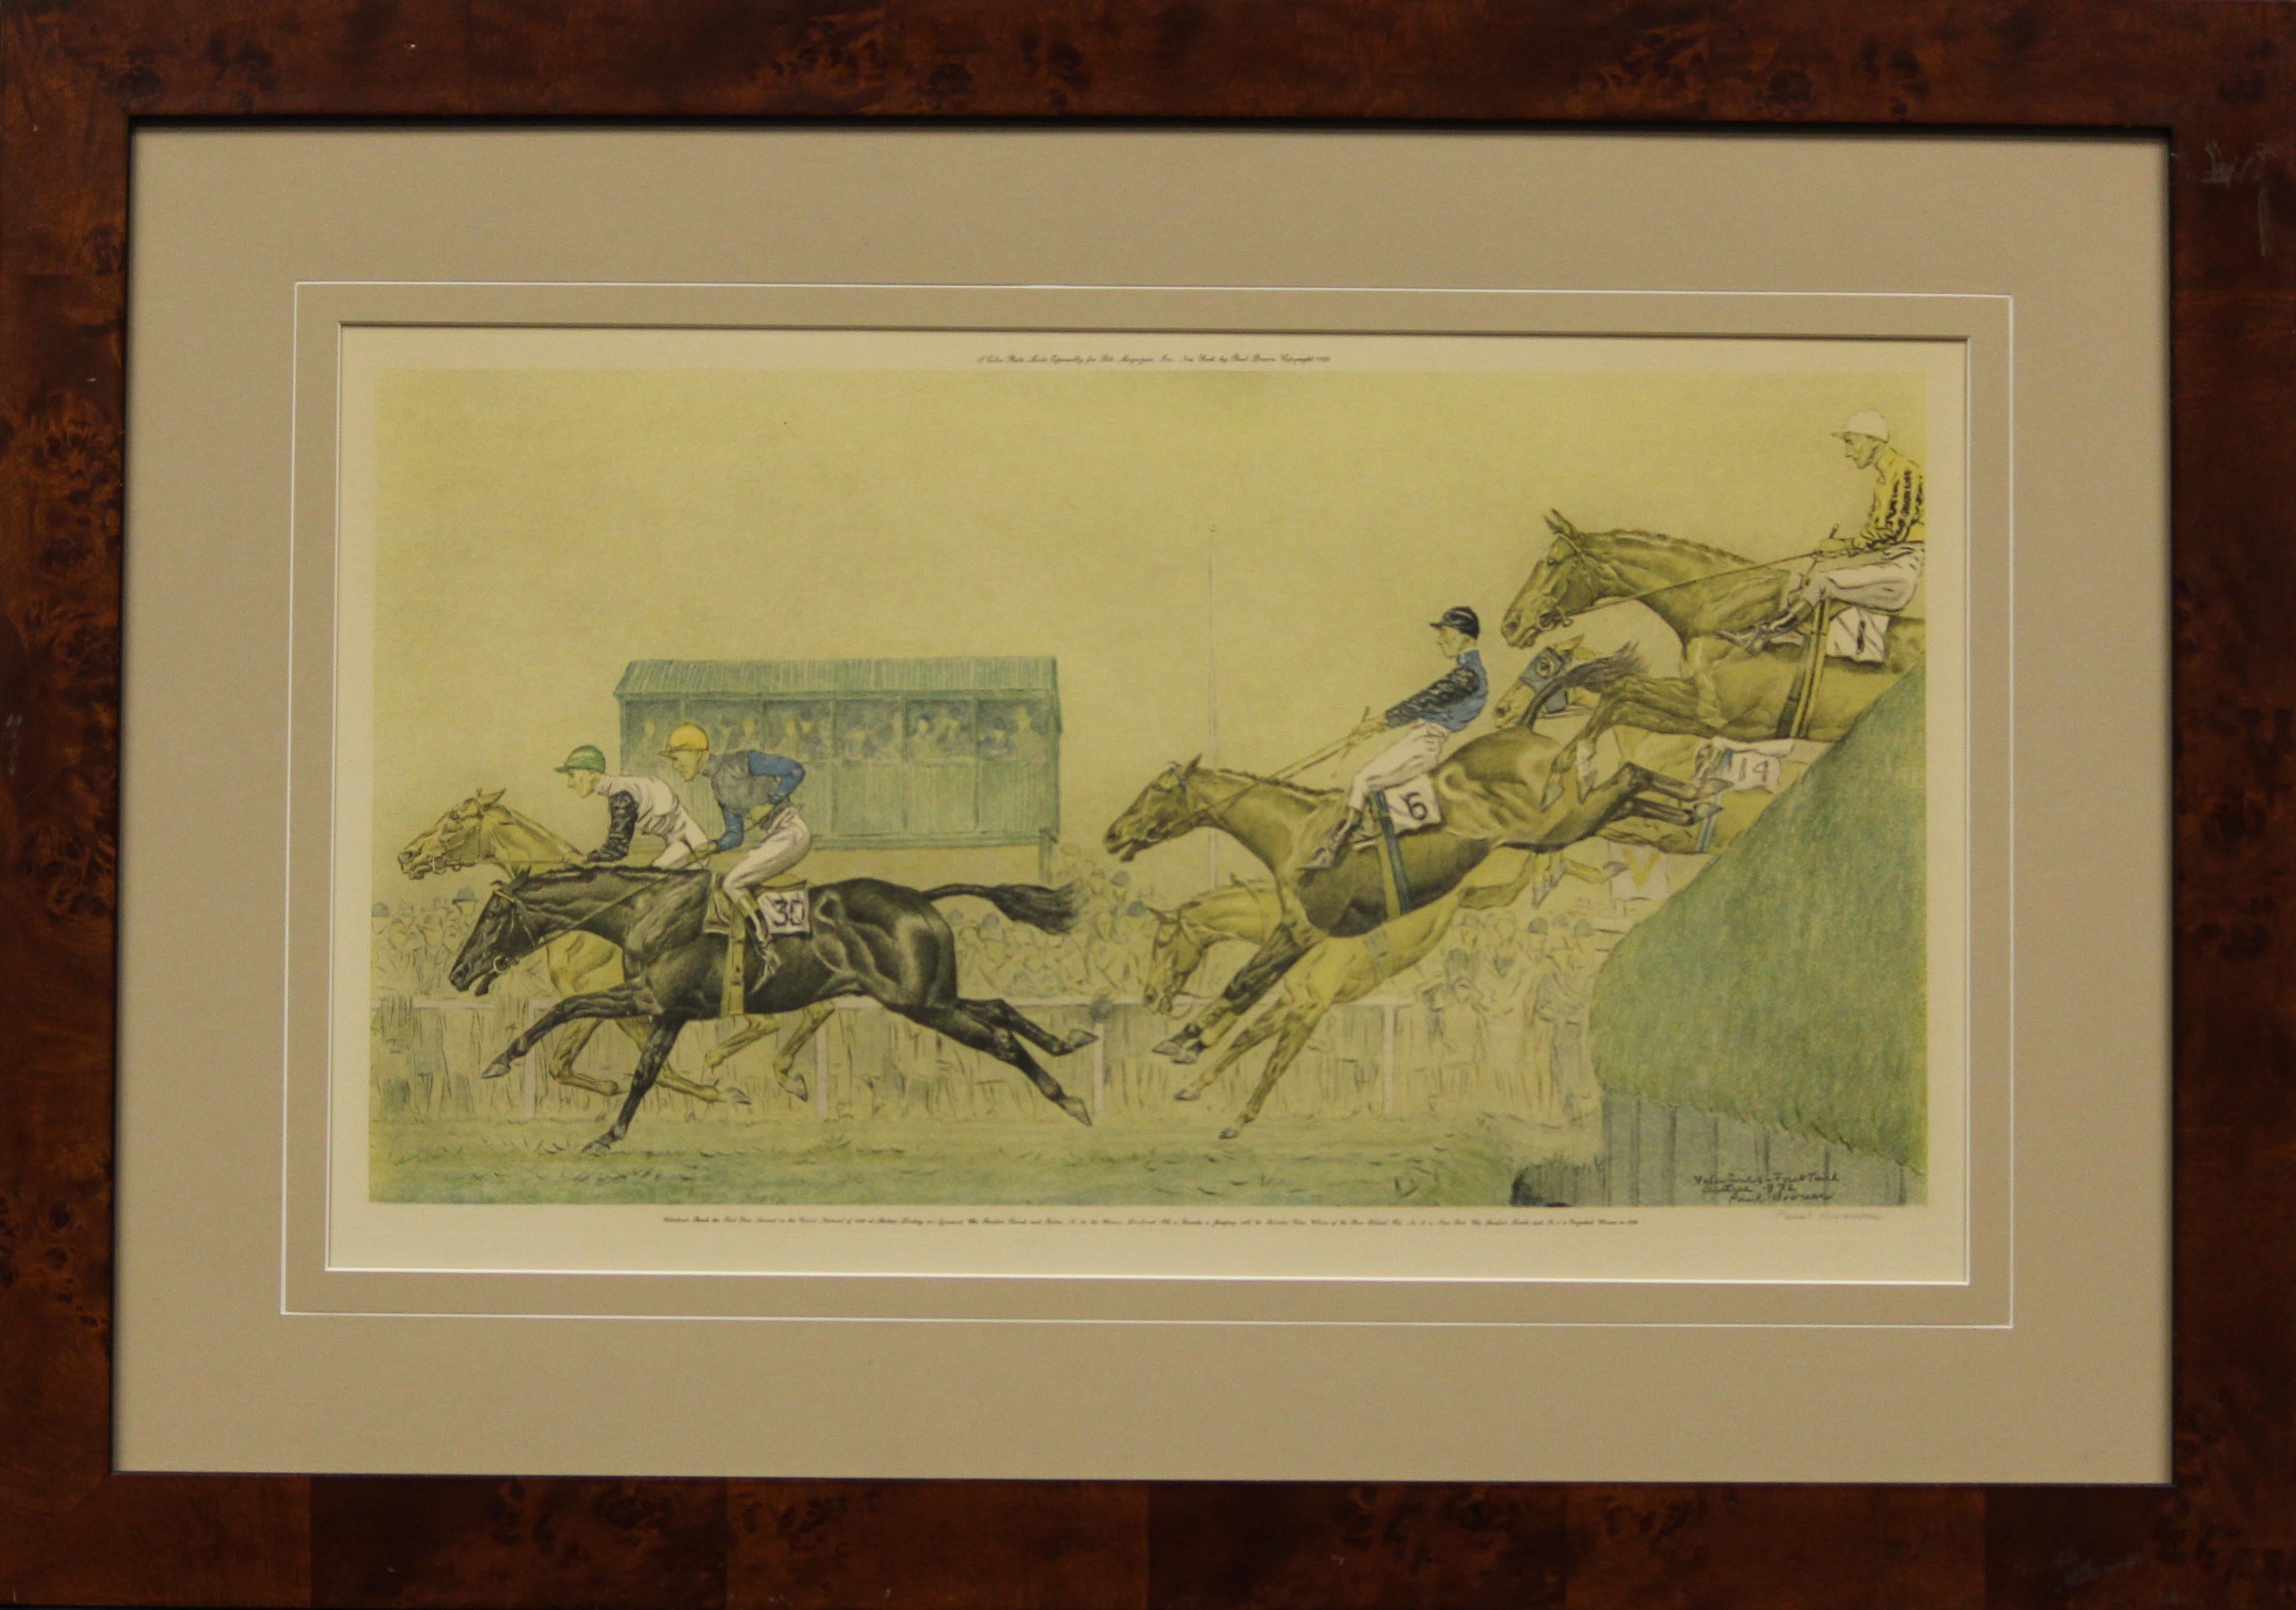 Valentine's Brook The First Time Around In The Grand National Of 1932 At Aintree - Print by Paul Desmond Brown